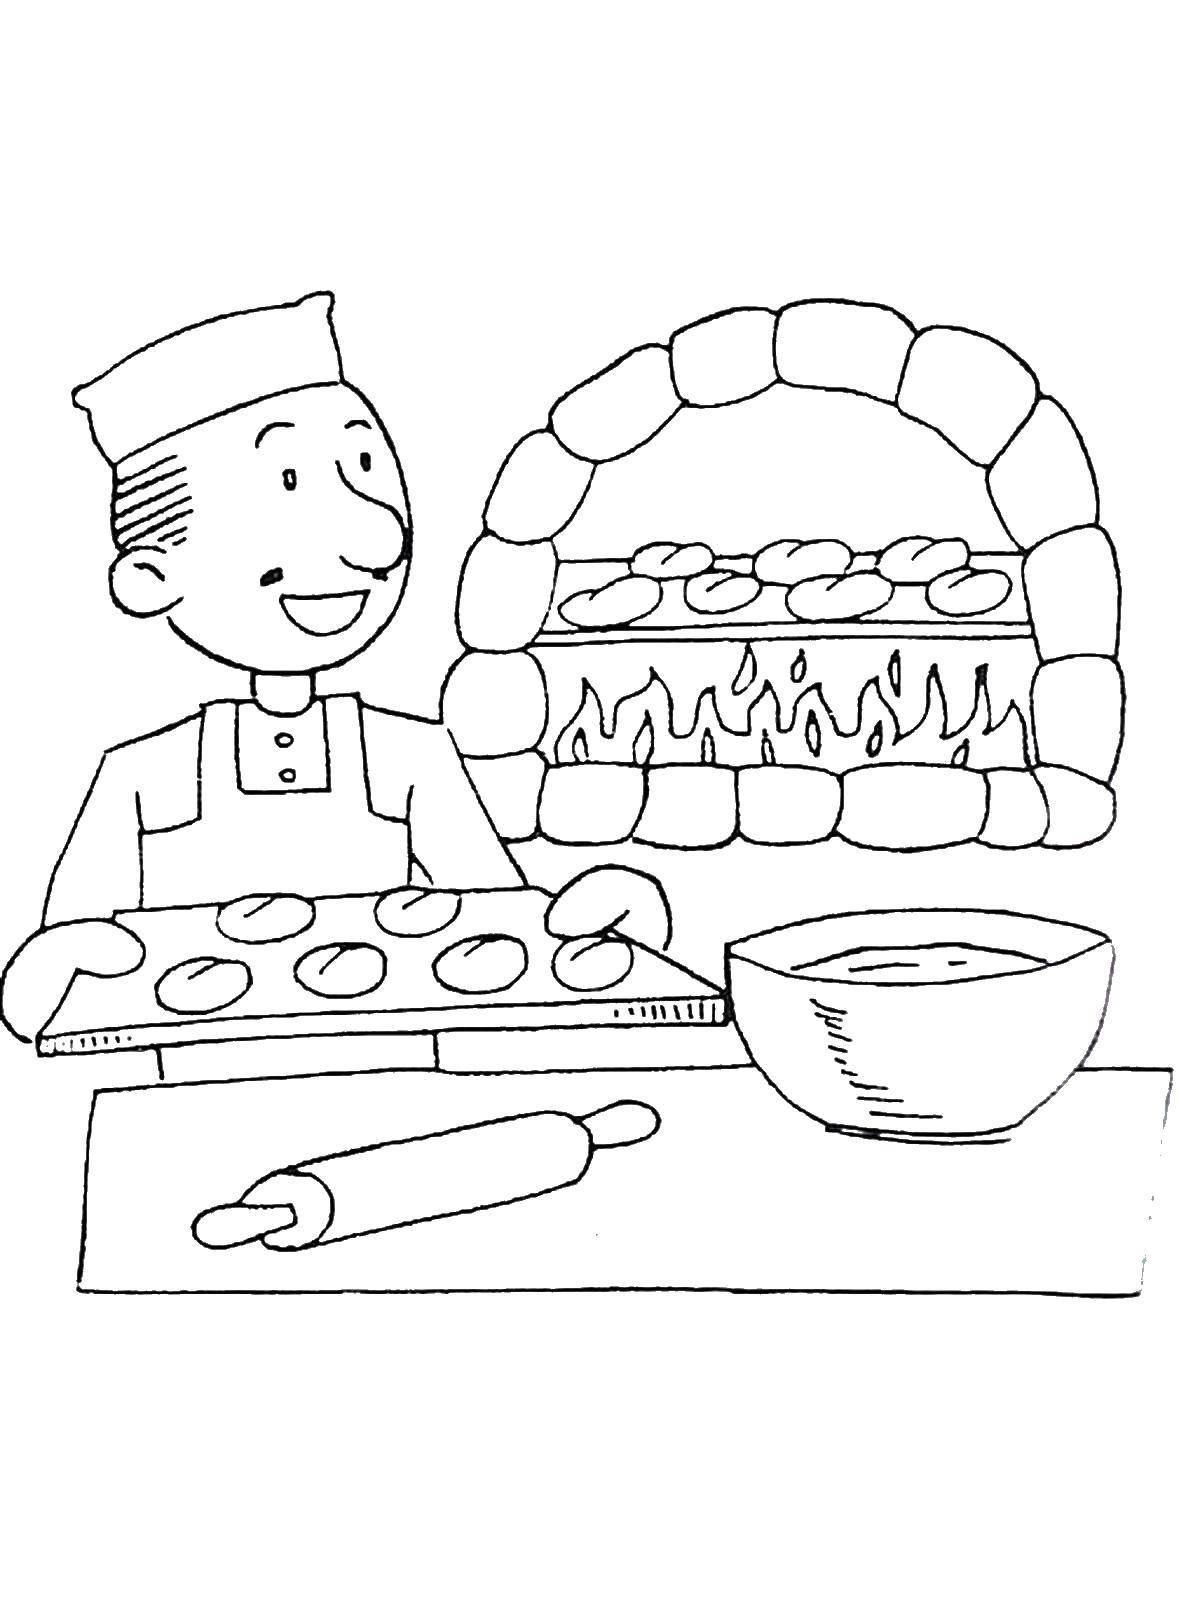 Online Coloring Pages Coloring Page Baker A Profession Coloring Books For Children